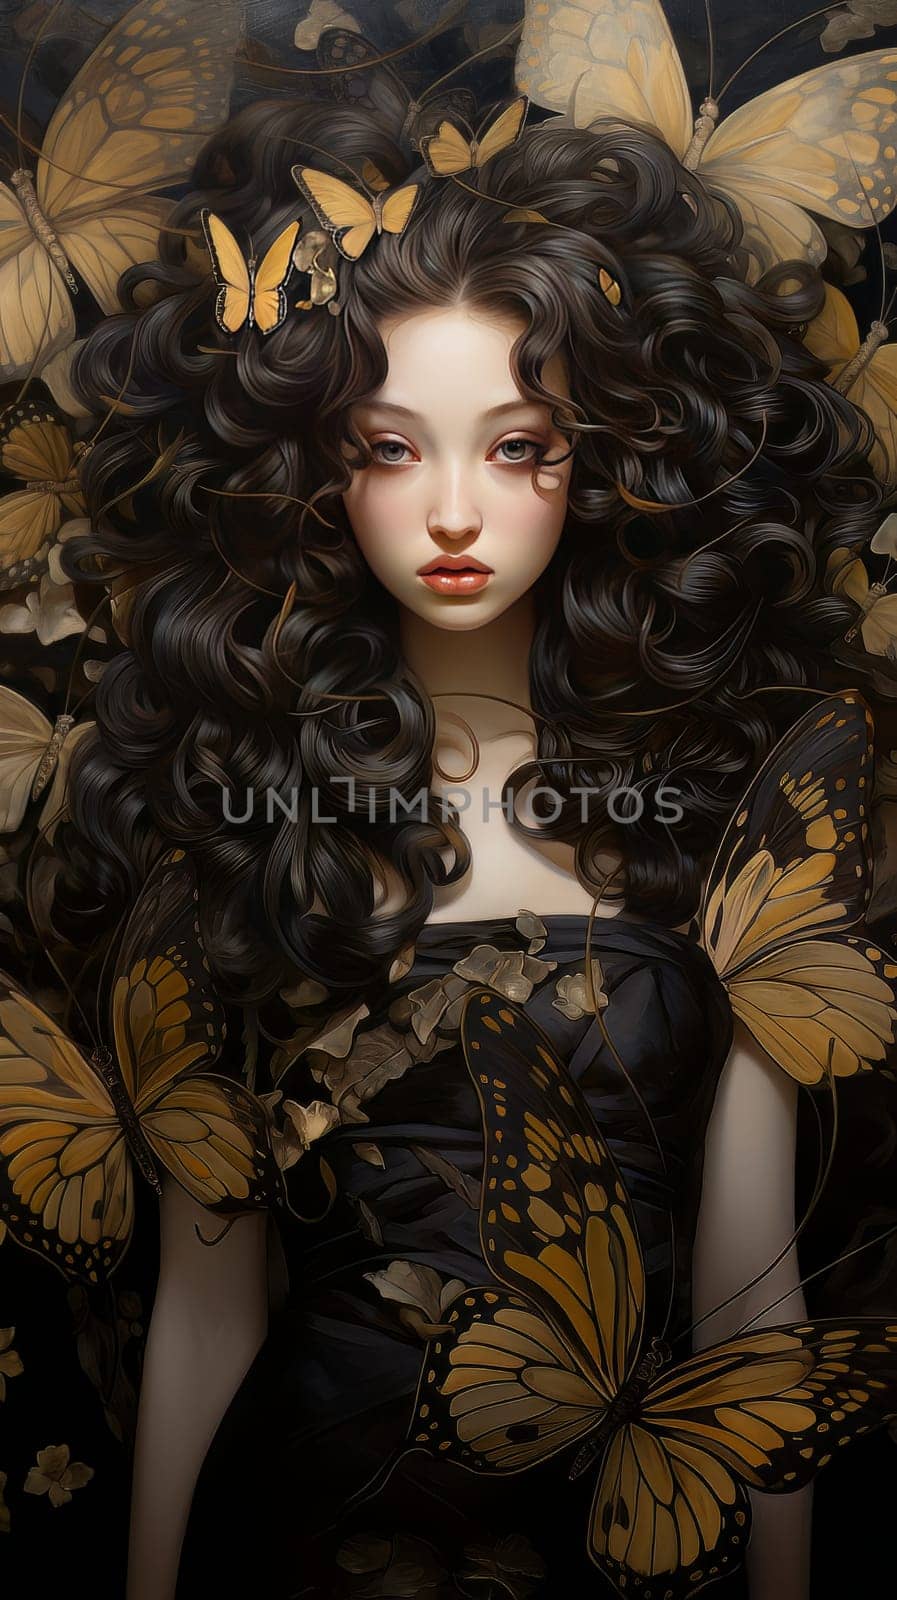 Abstract portrait of fantasy brunette doll princess with gorgeous curls AI by but_photo